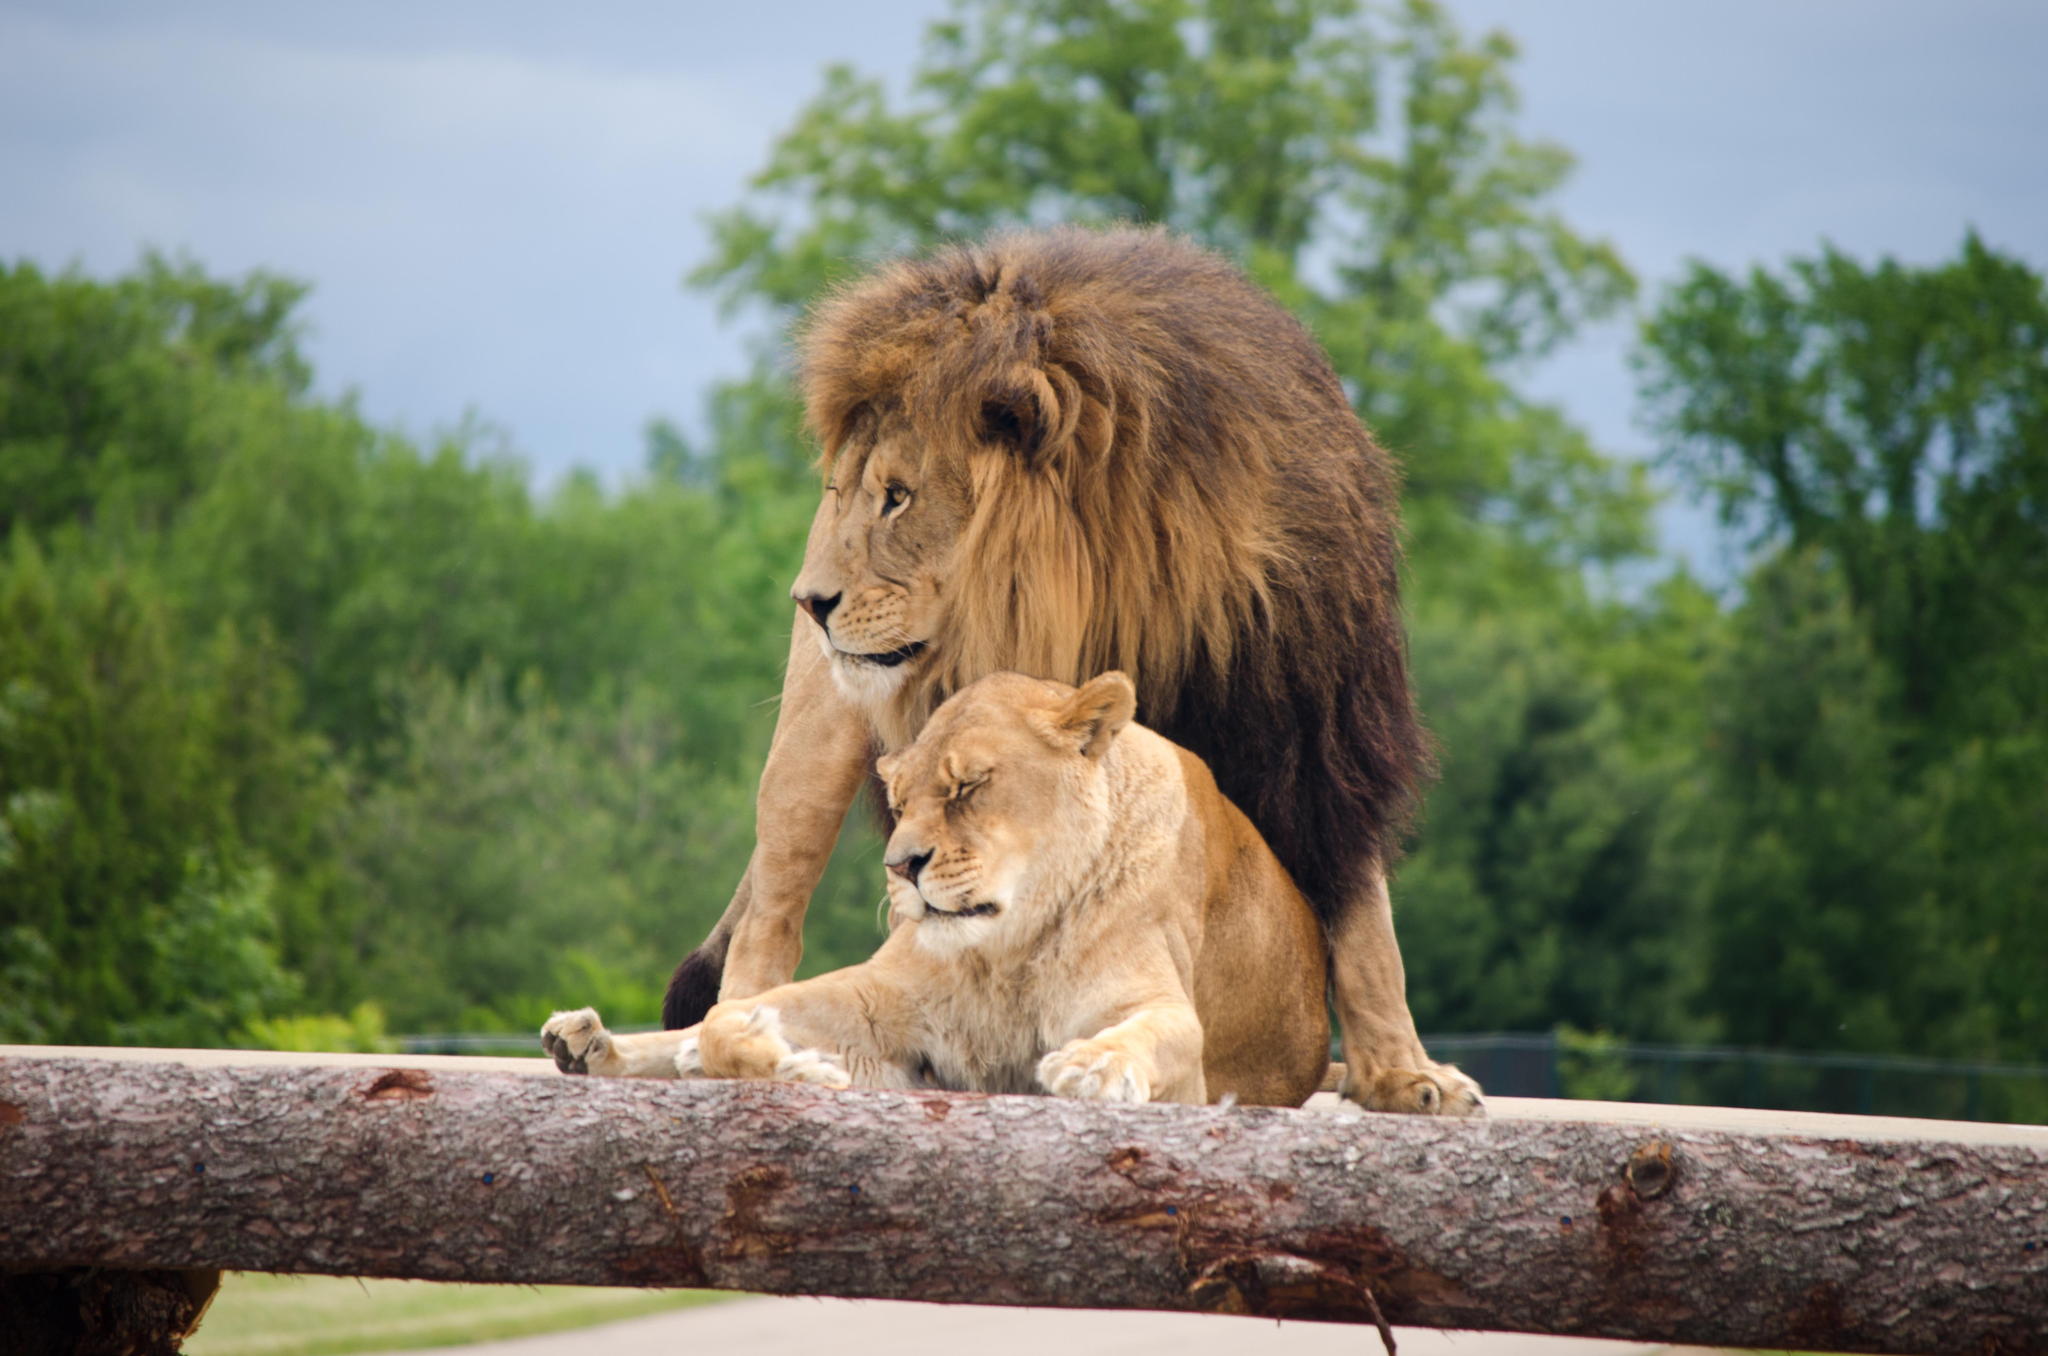 Lion and Lioness by Tim Piche